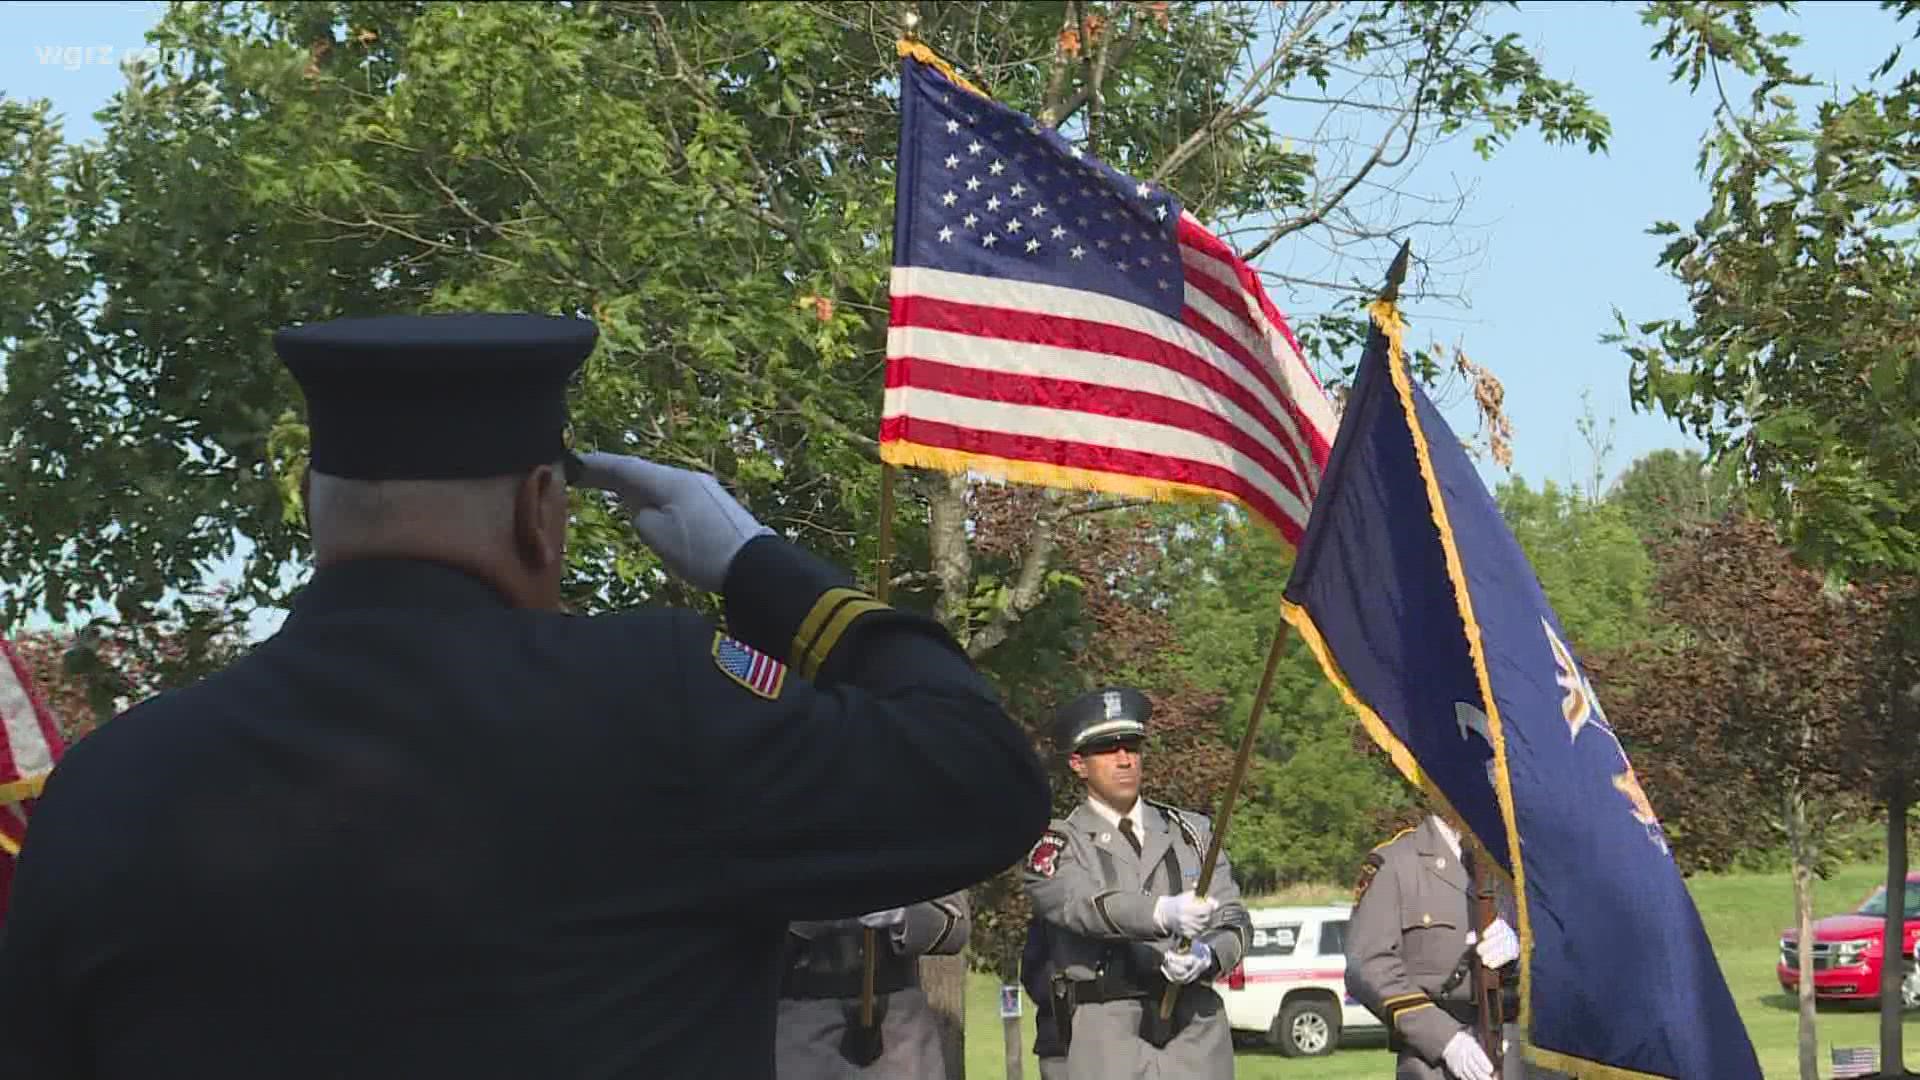 In Amherst, they were also remembering all the civilians, flight crews, and first responders who did not get to say a final goodbye to their loved ones.